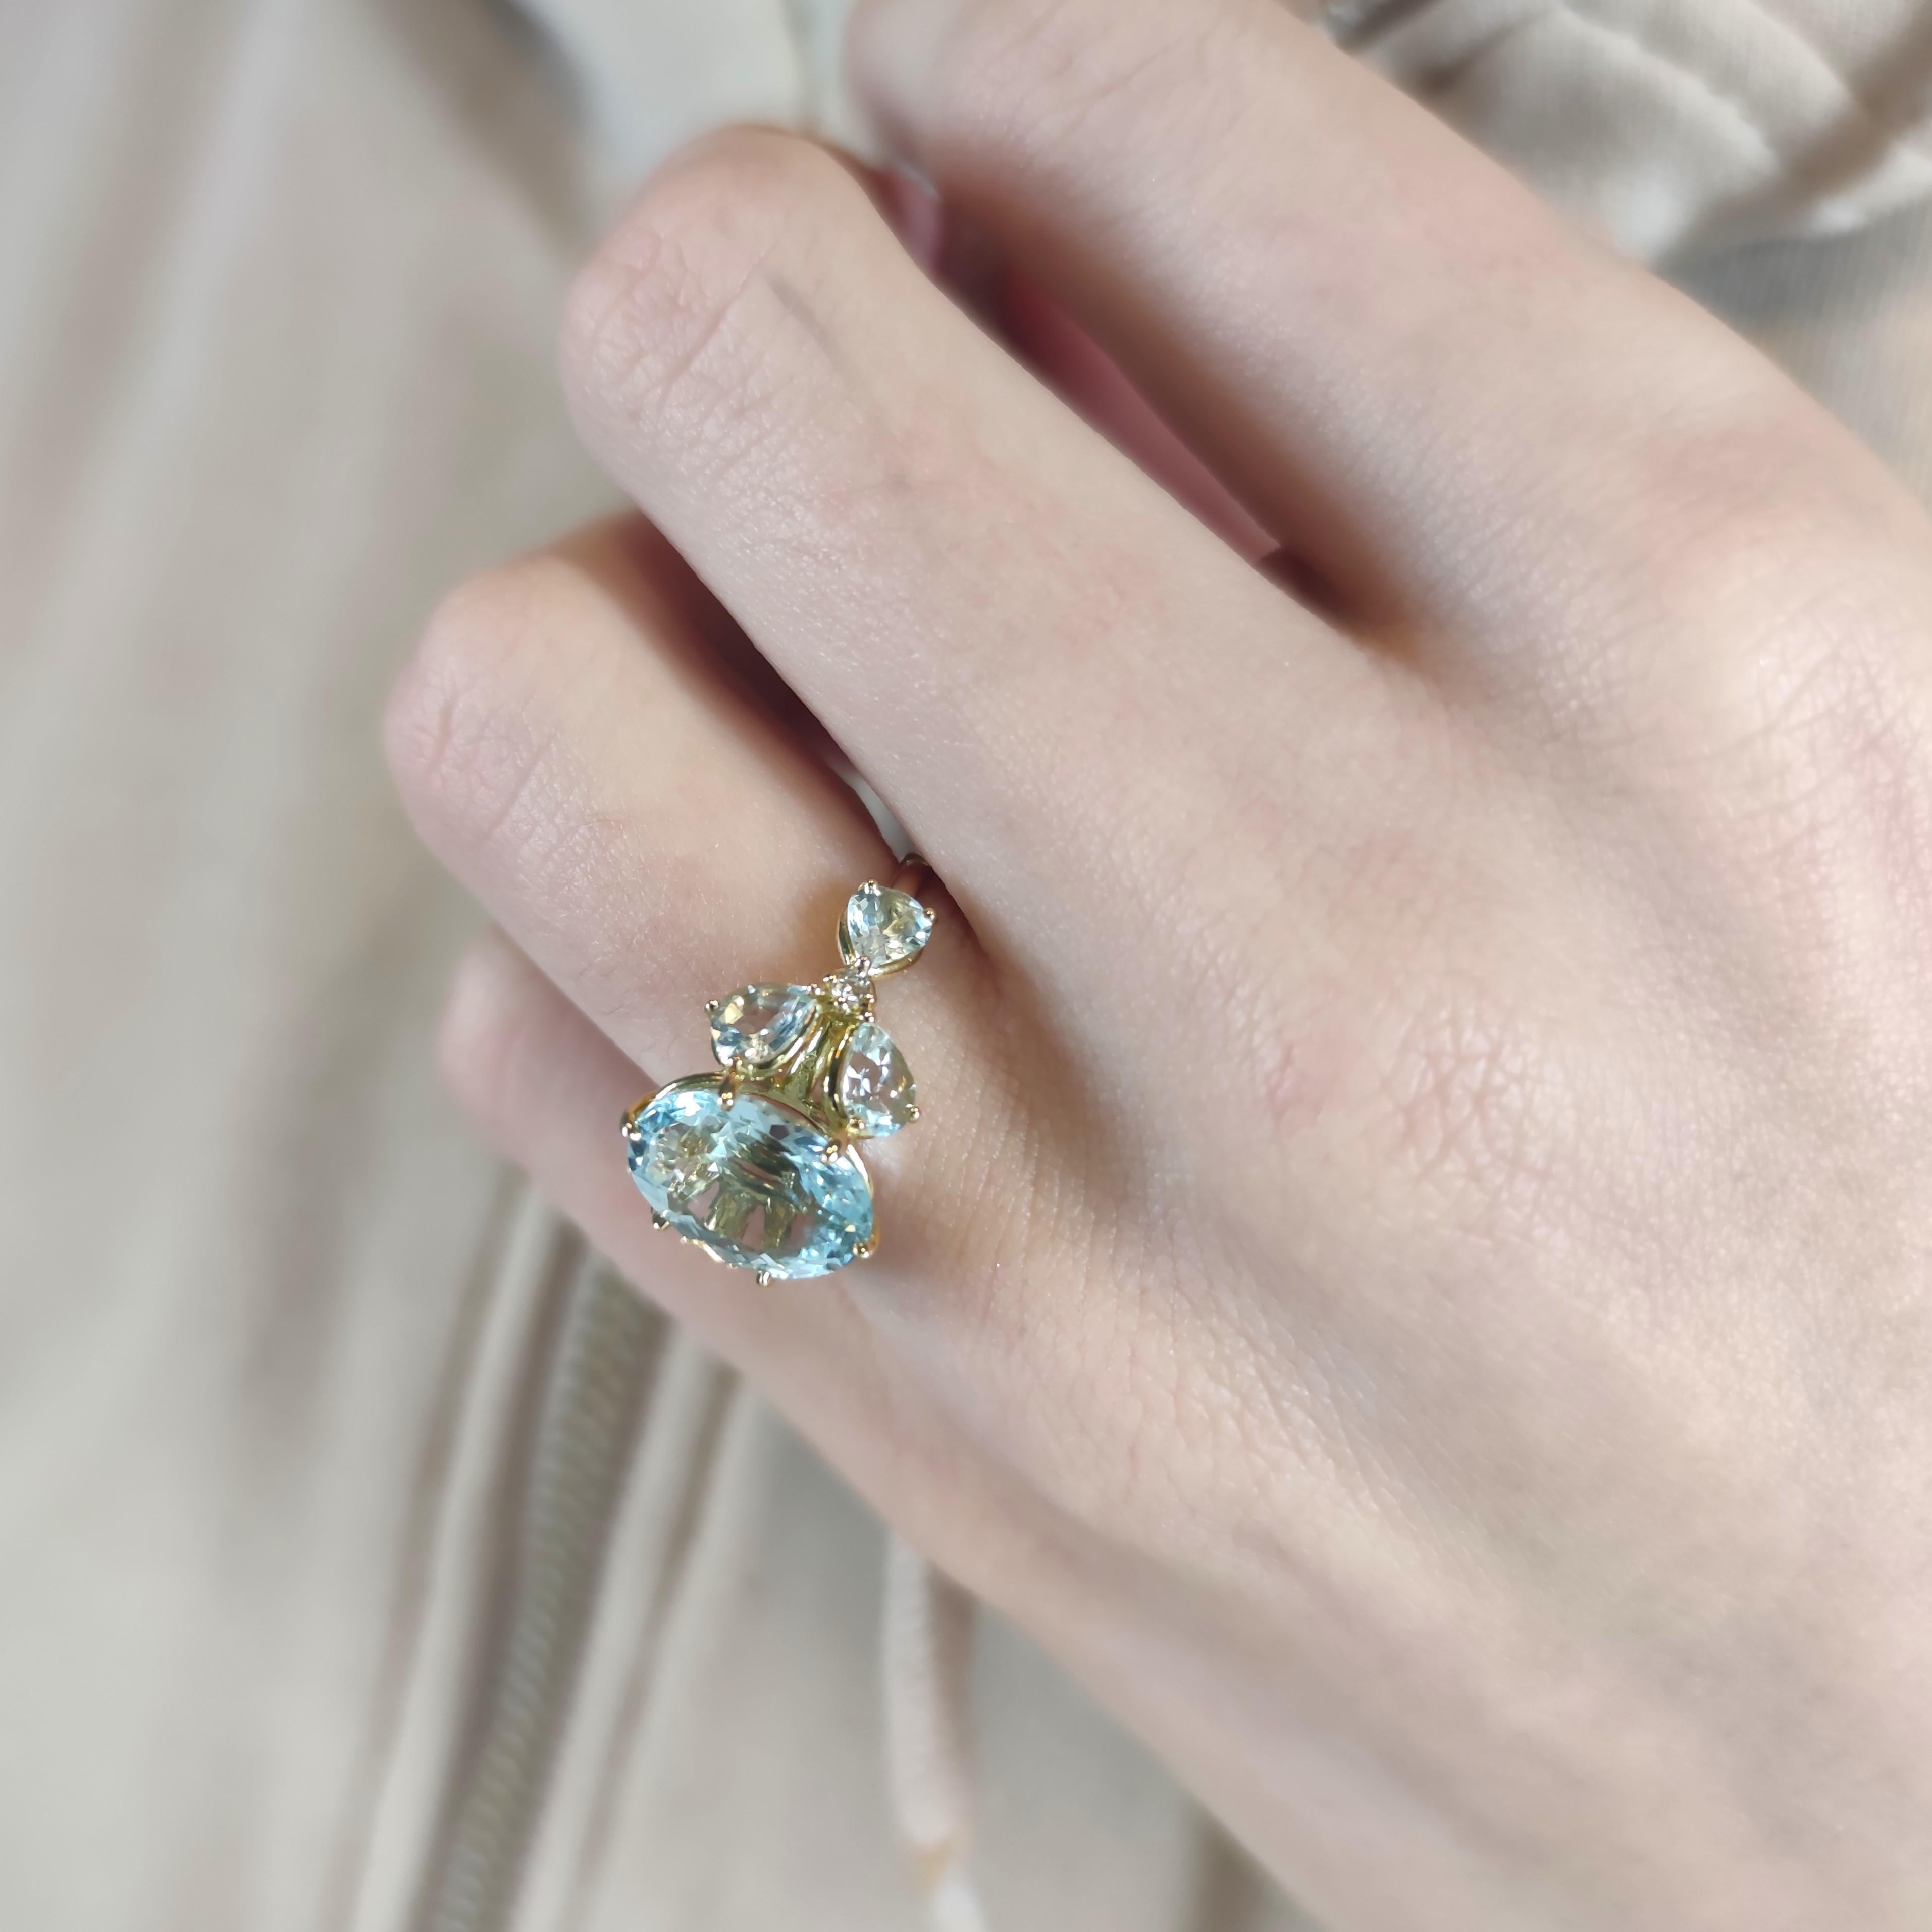 This gemstone engagement ring showcases a 3,47-carat oval-cut aquamarine, elegantly set in prongs and complemented by round brilliant cut diamonds adorning the shoulders. The total diamond weight for this exquisite piece is approximately 0.04